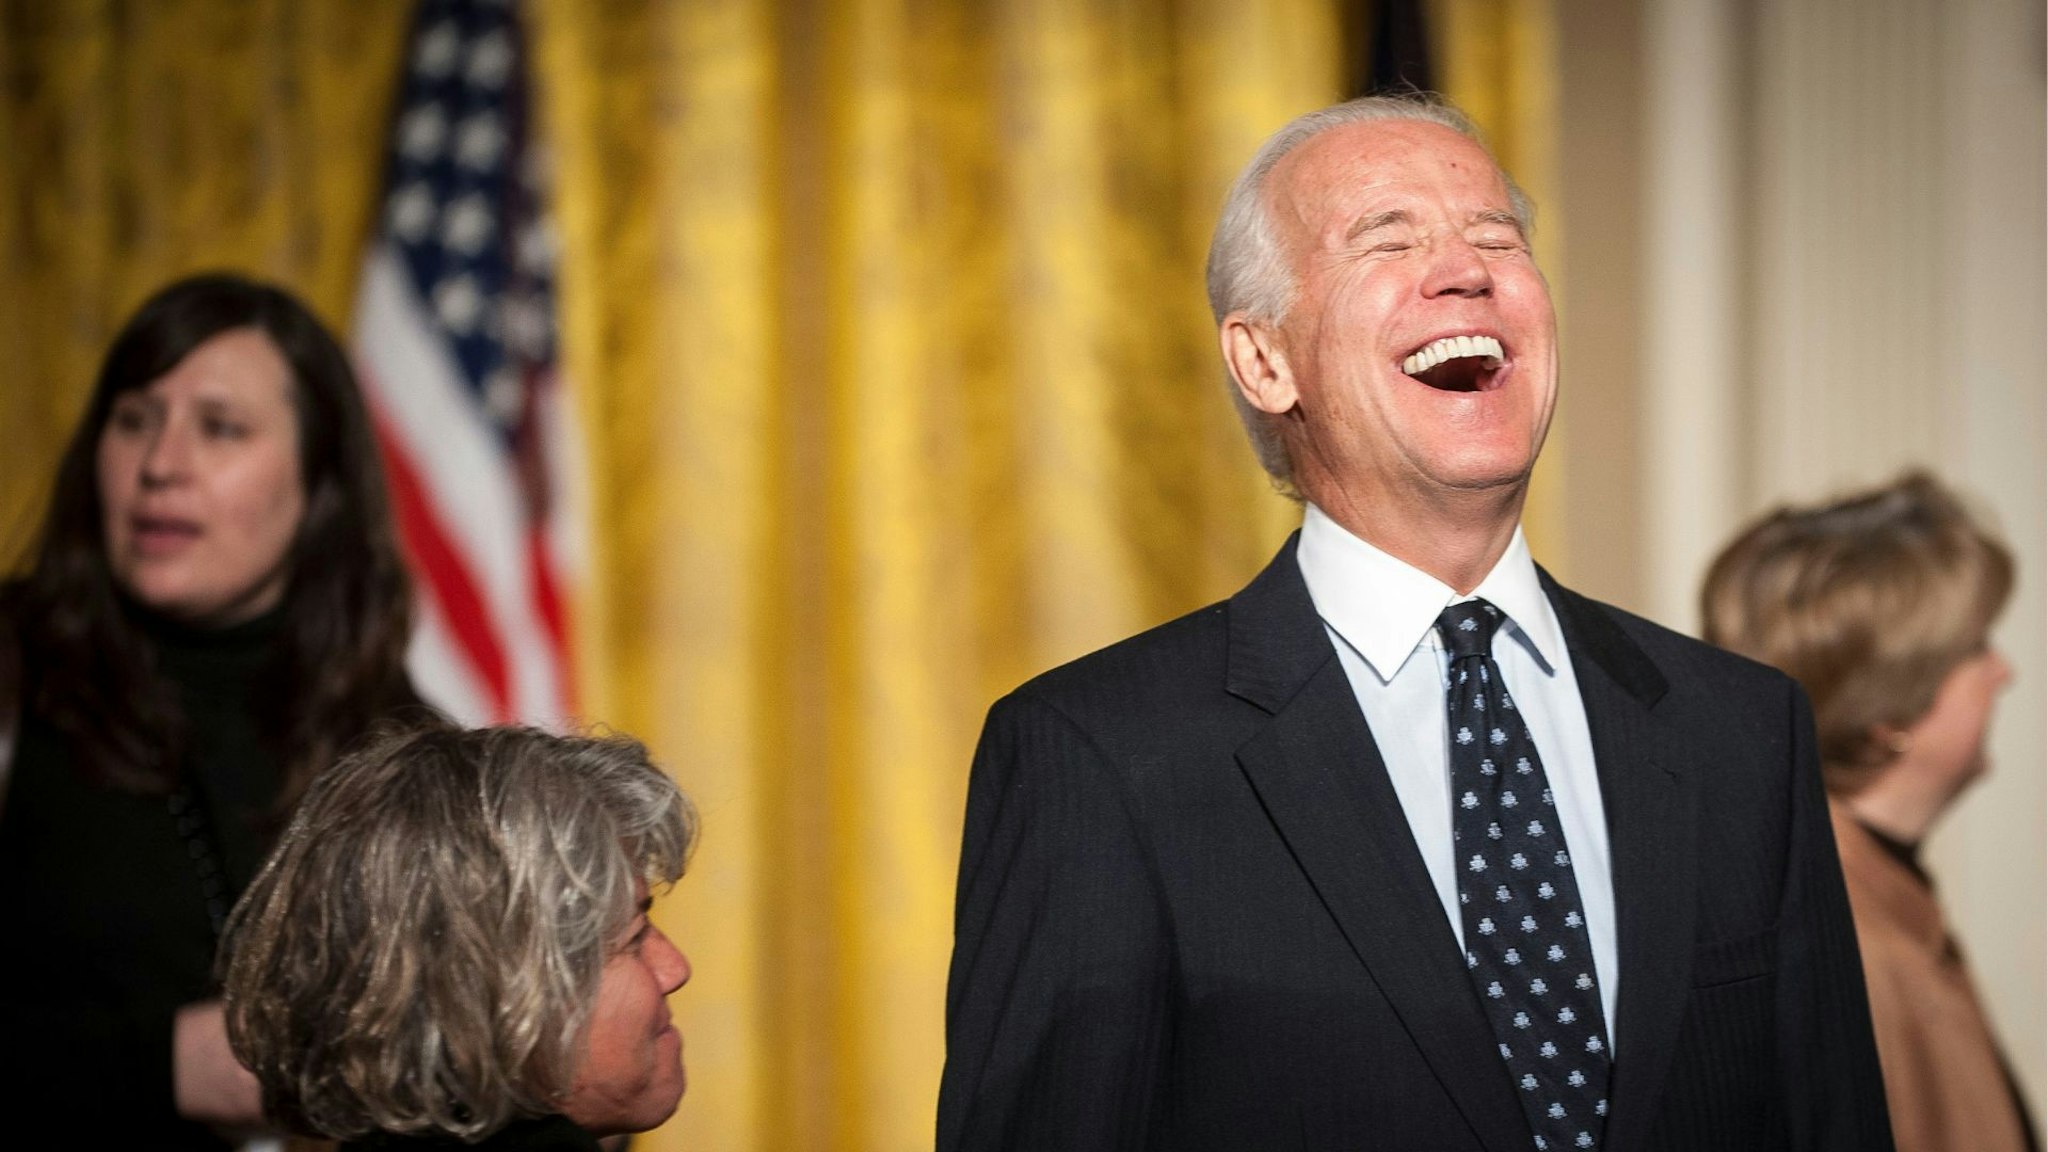 Bloomberg's Best Photos 2014: U.S. Vice President Joe Biden, right, laughs during an event for the Council on Women and Girls in the East Room of the White House in Washington, D.C., U.S., on Wednesday, Jan 22, 2014. U.S. President Barack Obama signed a presidential memorandum establishing a White House task force to protect students from sexual assault.